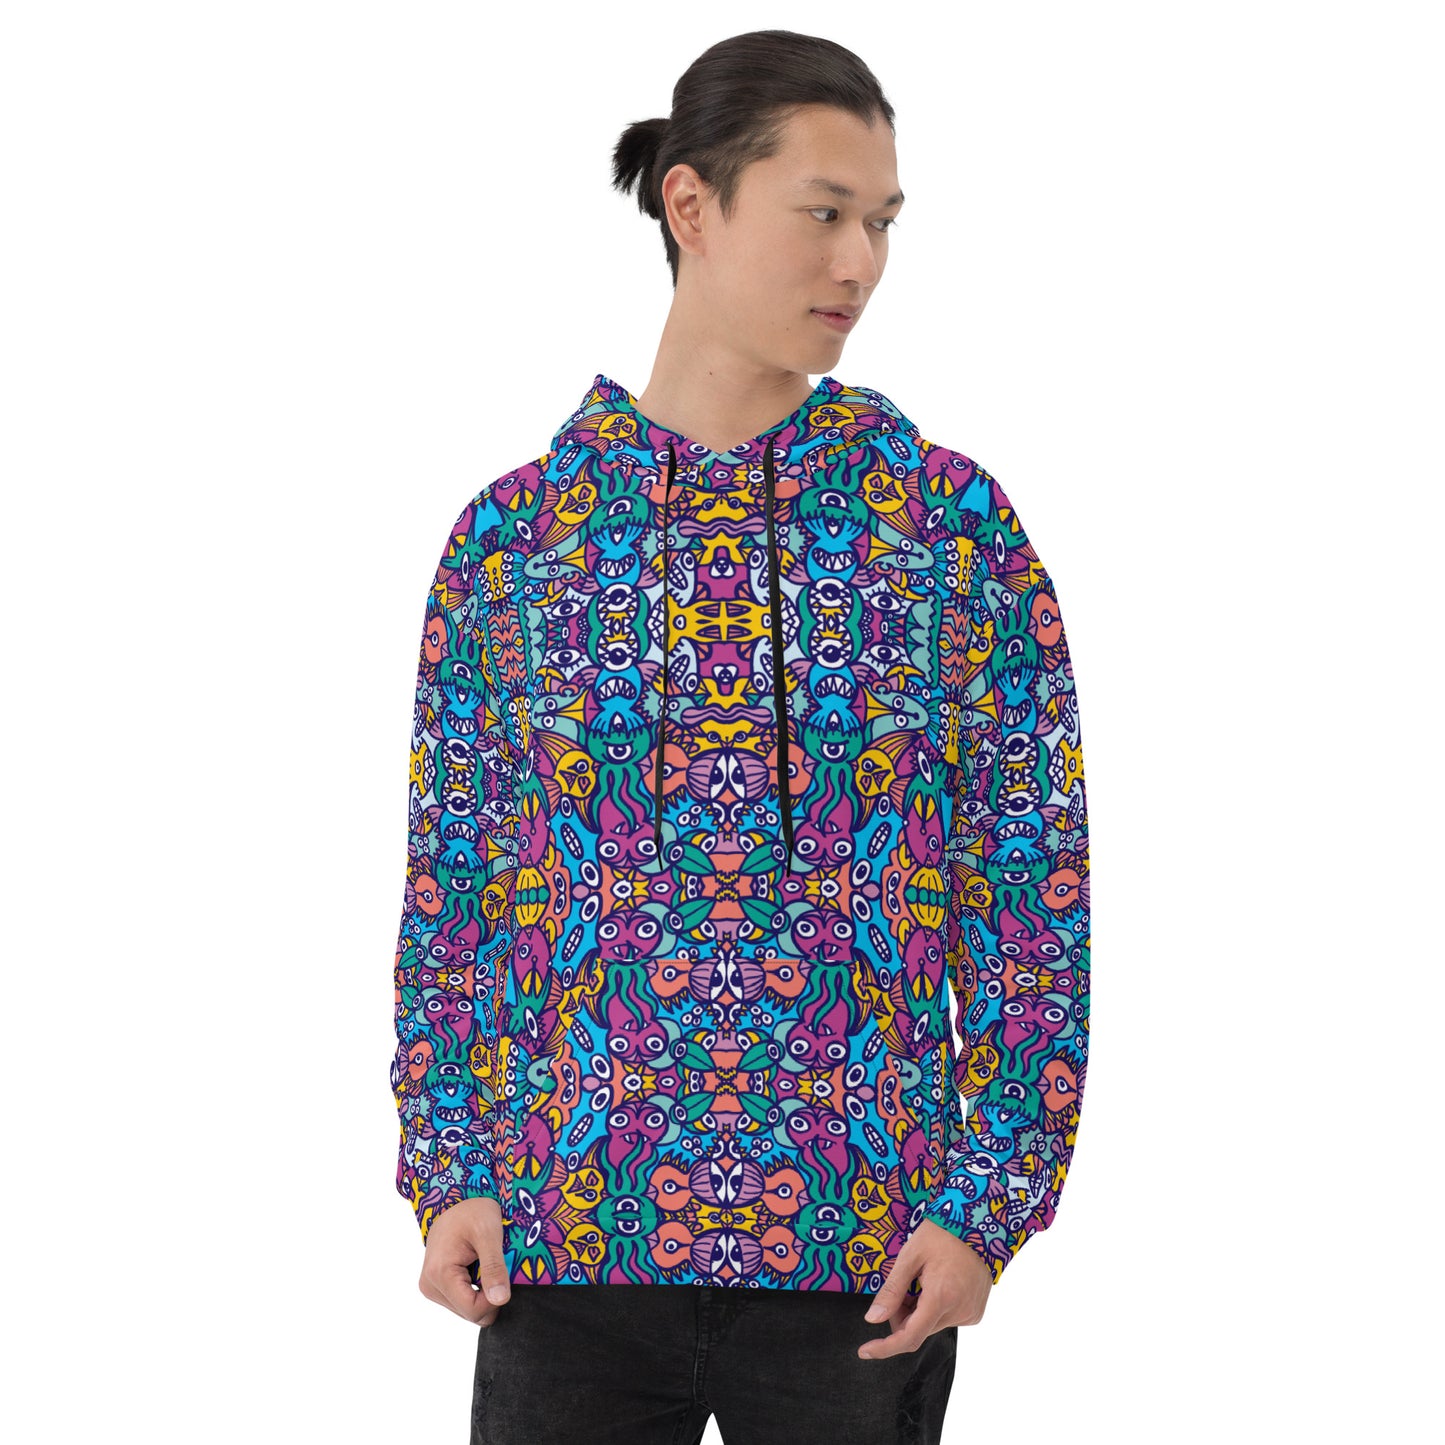 Young man wearing Unisex Hoodie All over printed with Whimsical design featuring multicolor critters from another world